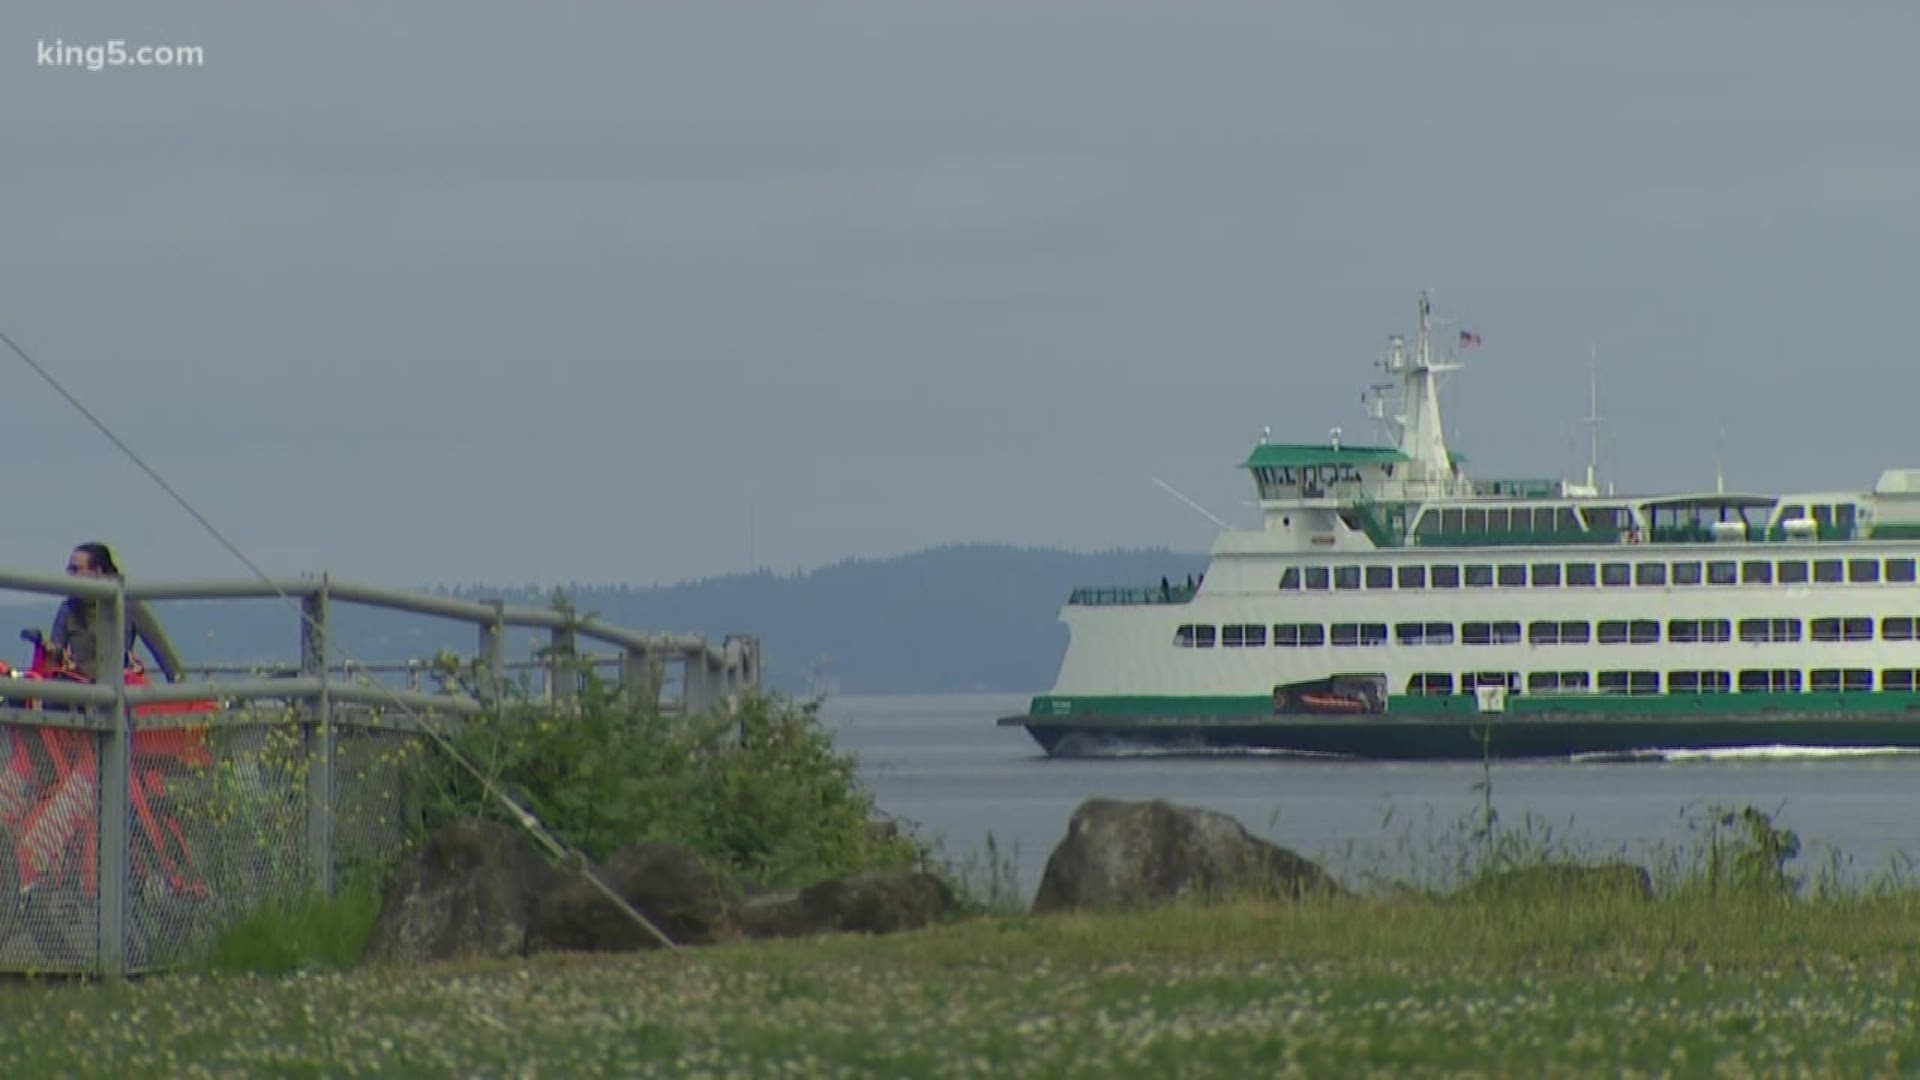 King 5's Michael Crowe and Alison Morrow give us the latest on the search for the whale struck by a Washington State Ferry.